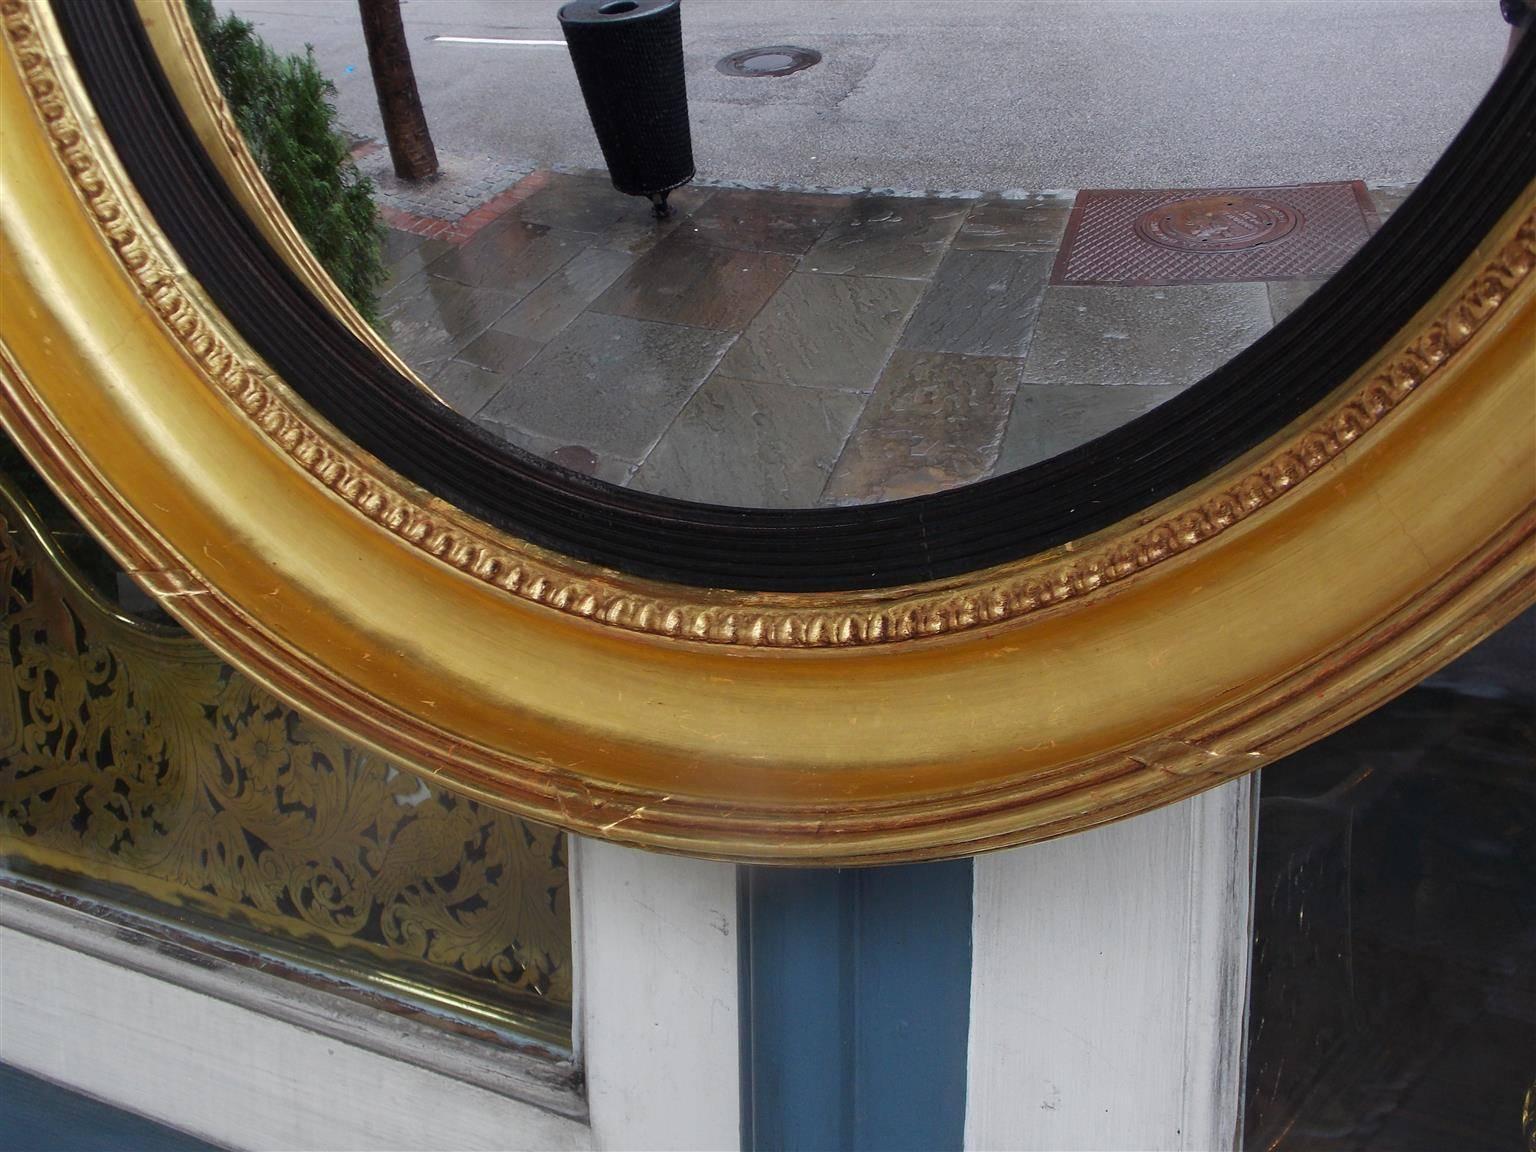 Early 19th Century American Federal Gilt Acanthus Convex Mirror with Perched Eagle, Circa 1810